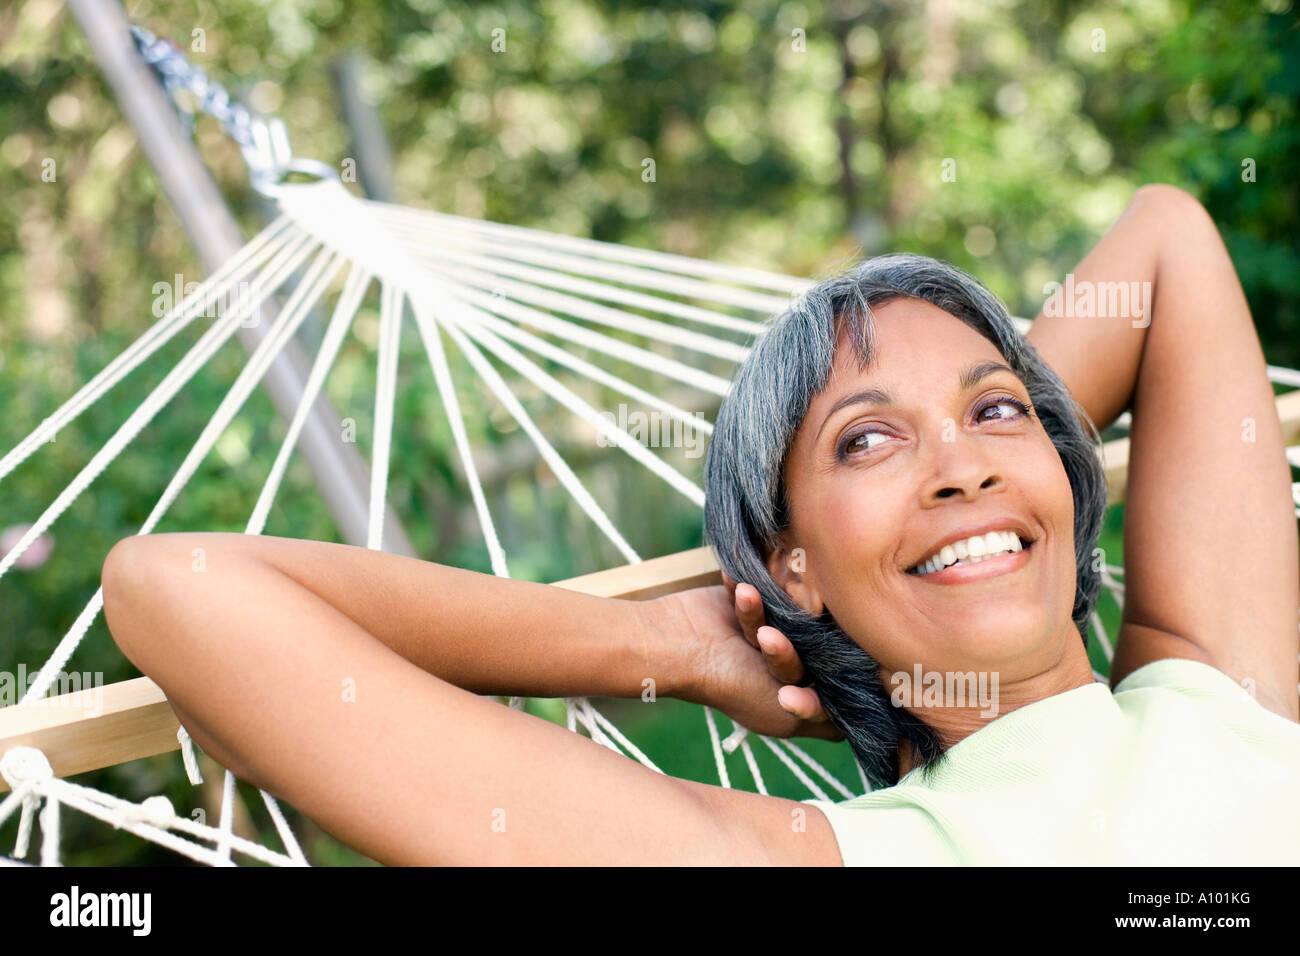 Middle-aged African woman relaxing in a hammock Banque D'Images